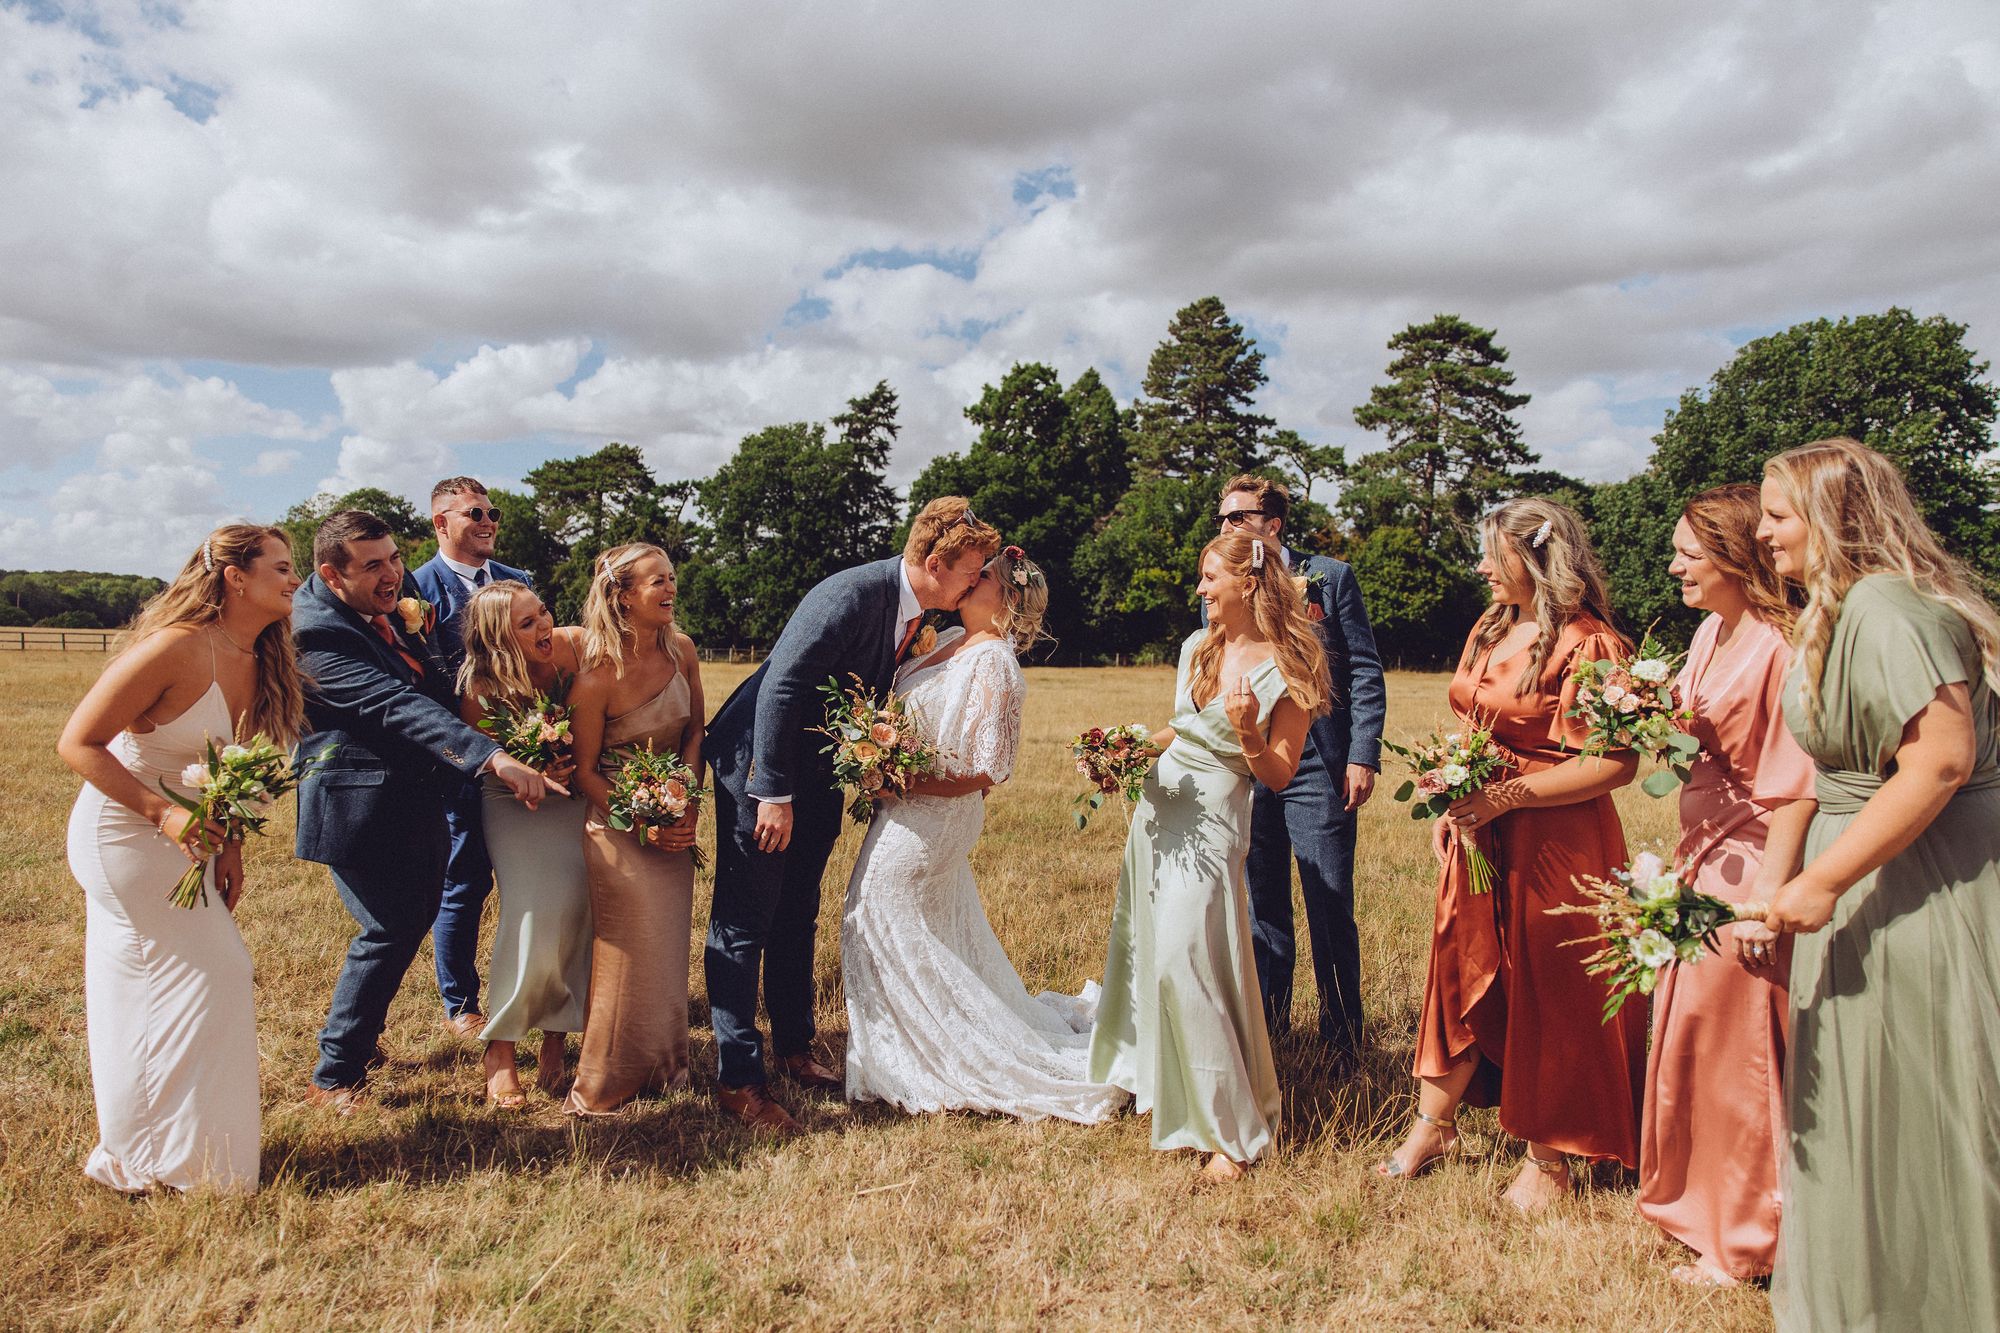 Nor and Dan's wedding party cheer as they share a kiss in the Buckinghamshire countryside. Photo thanks to Fordtography.